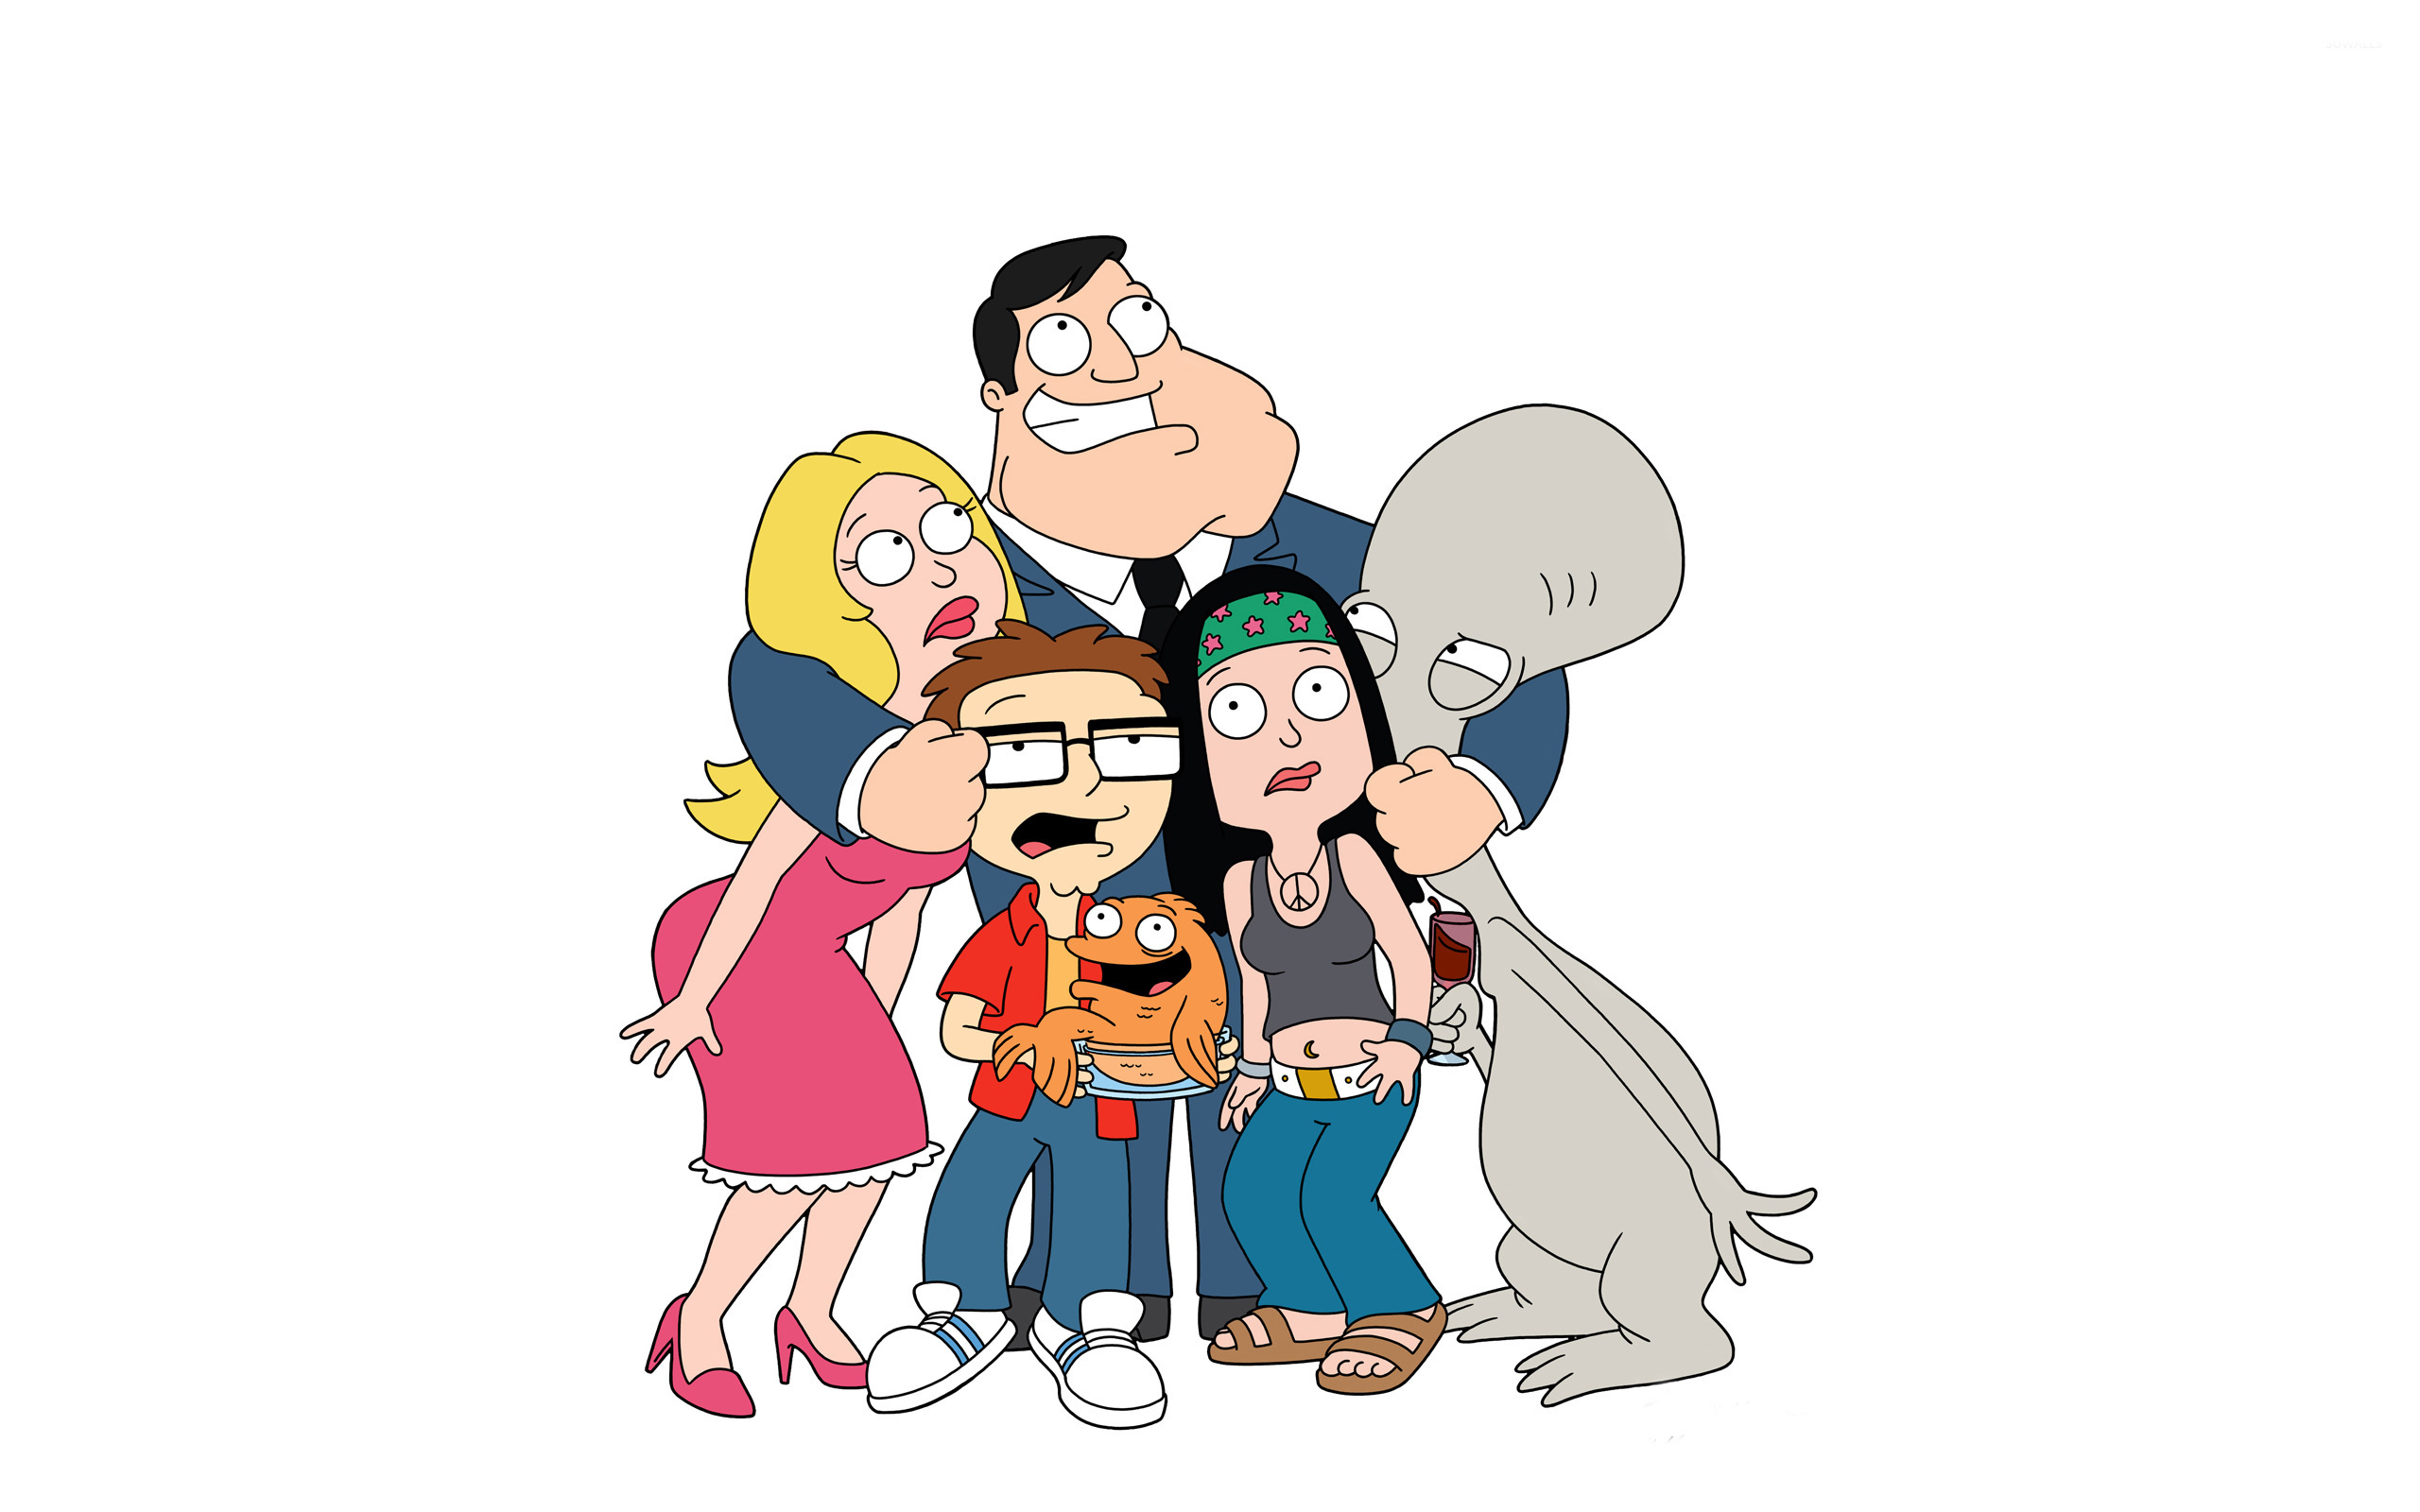 FREE Cartoon Graphics  Pics  Gifs  Photographs American Dad  backgrounds and wallpapers